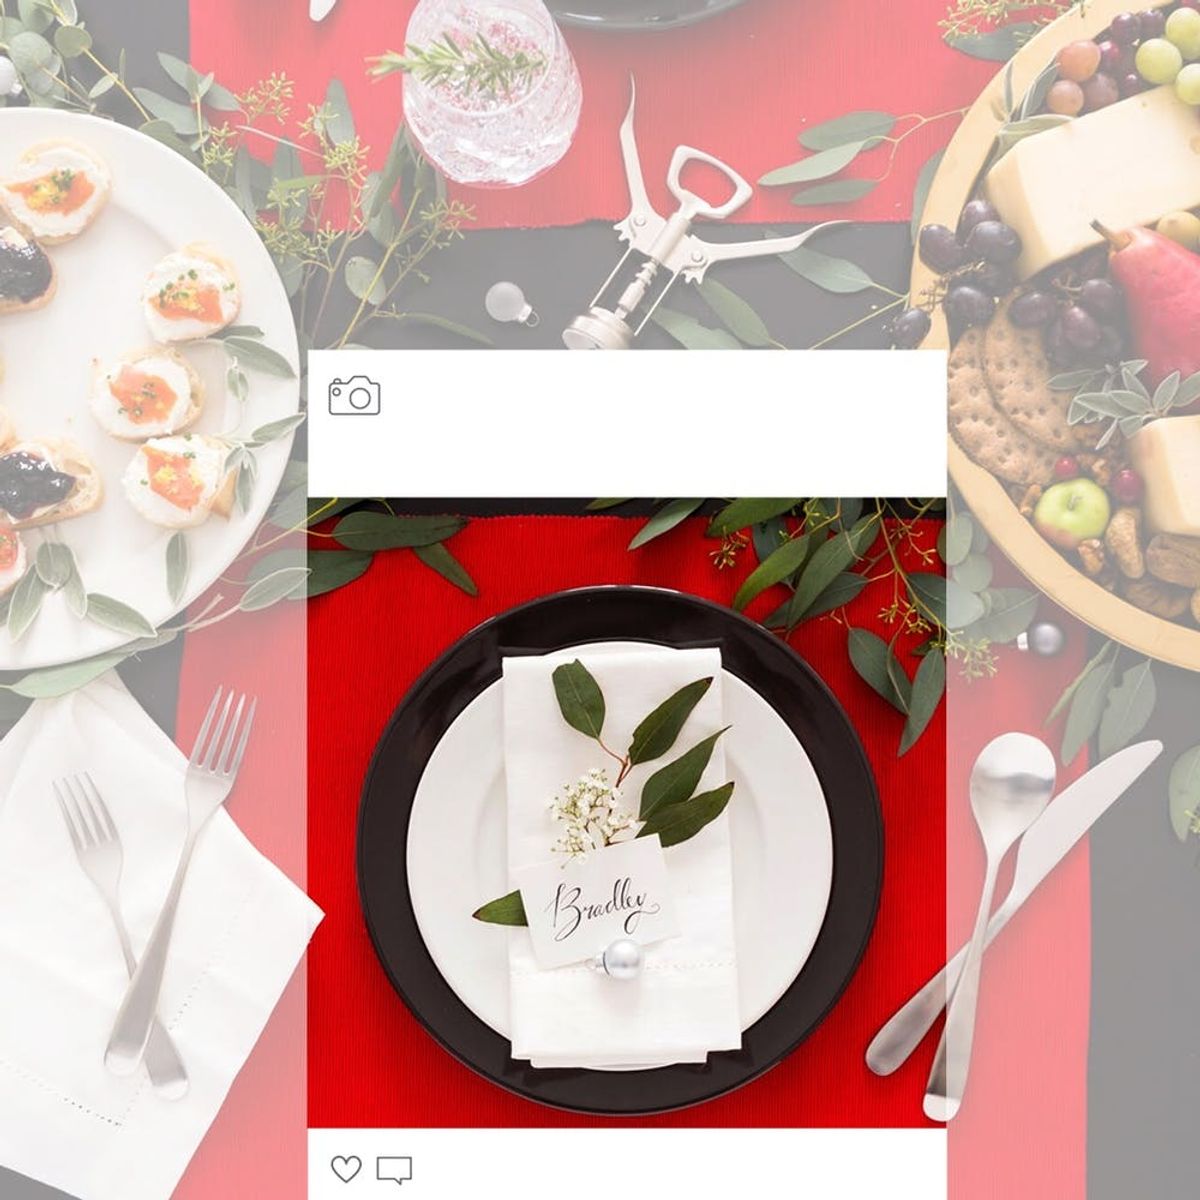 How to Host an Instagram-Worthy Holiday Party